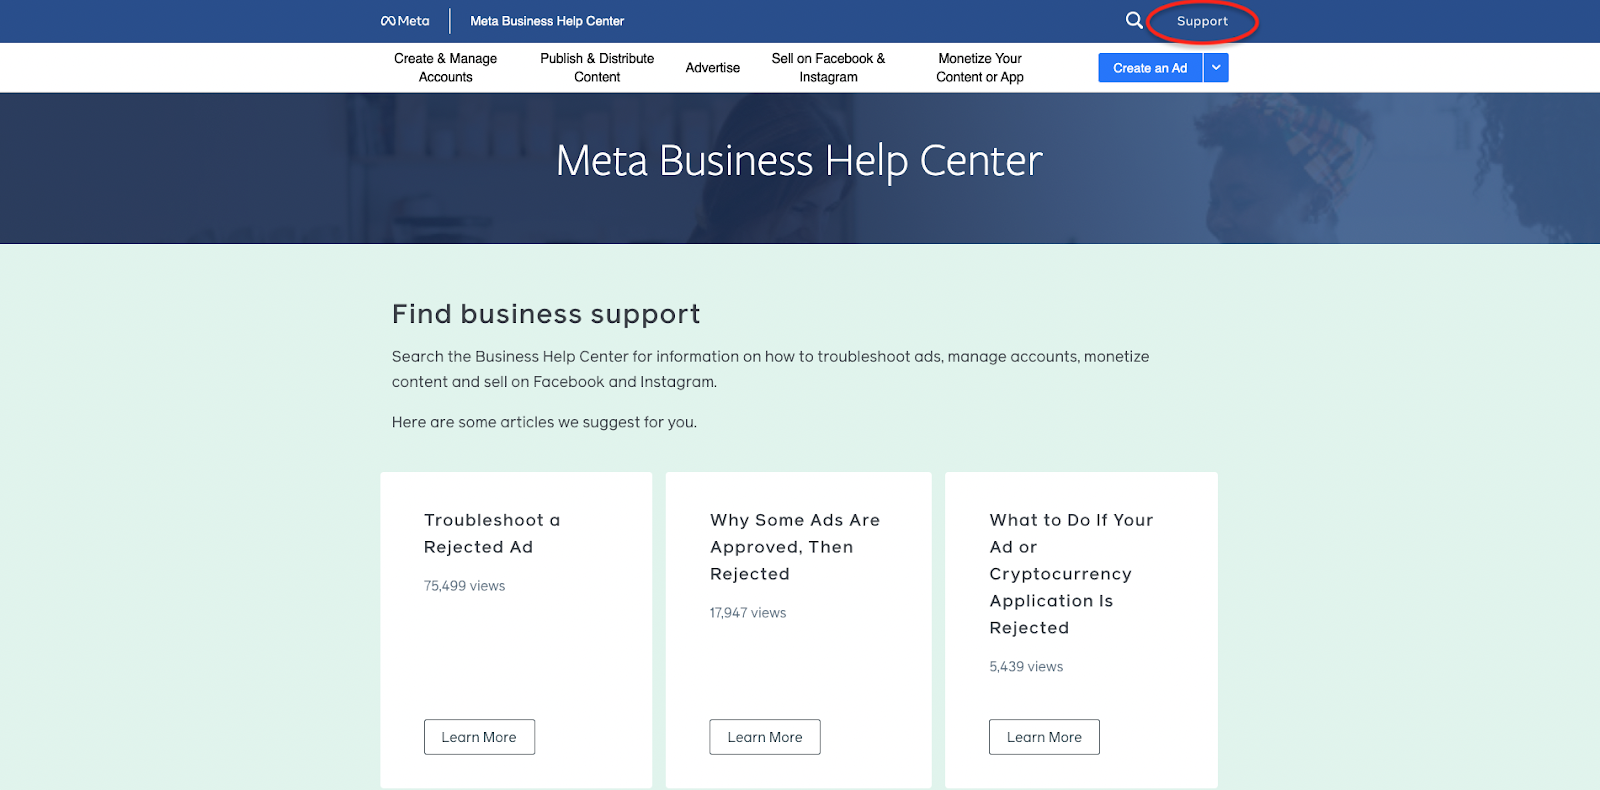 How to Get Support for Meta Business Suite Issues